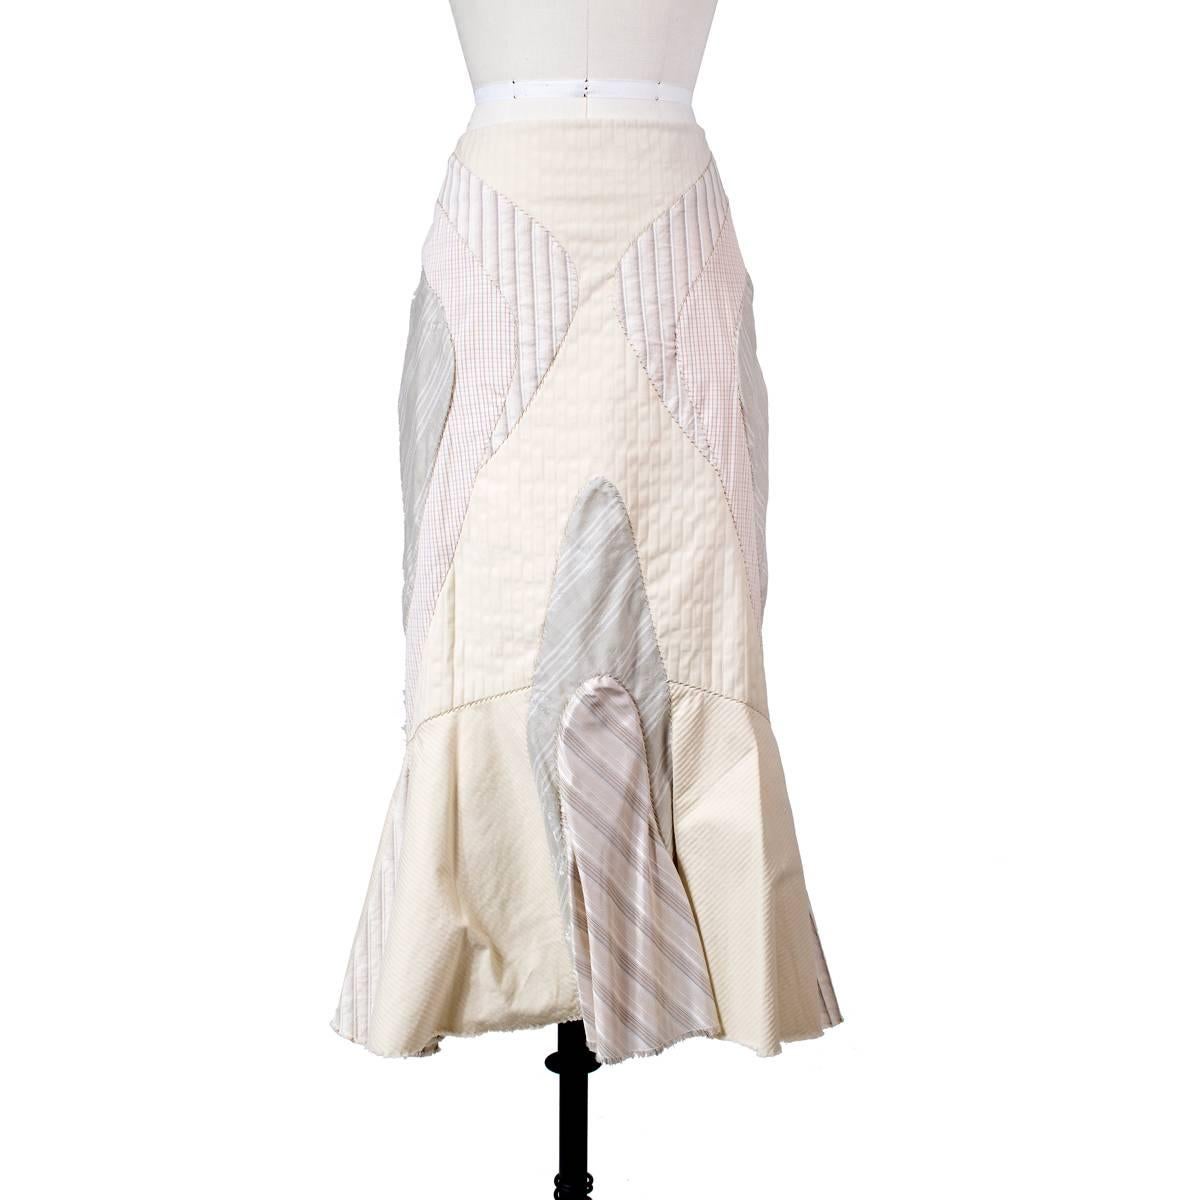 This is a skirt by Alexander McQueen from the S/S 2004 RTW collection.  It features a patchwork design of different patterns using pastel colors.  It has a mermaid shape and side zipper closure.  100% cotton outer with satin lining.  

Size 38
28